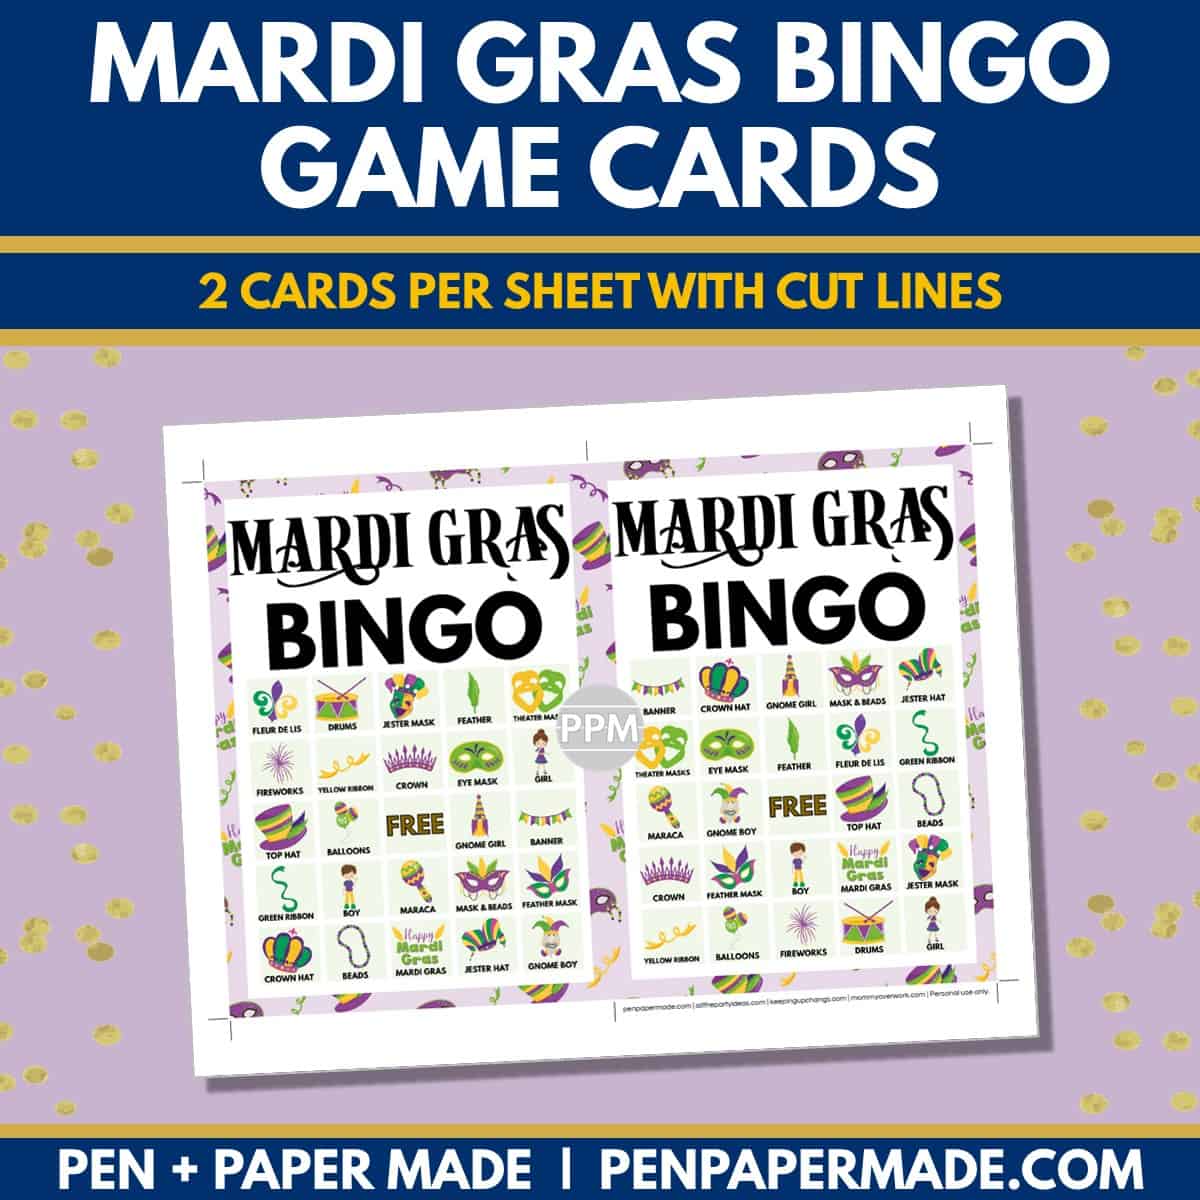 mardi gras bingo card 5x5 5x7 game boards with images and text words.